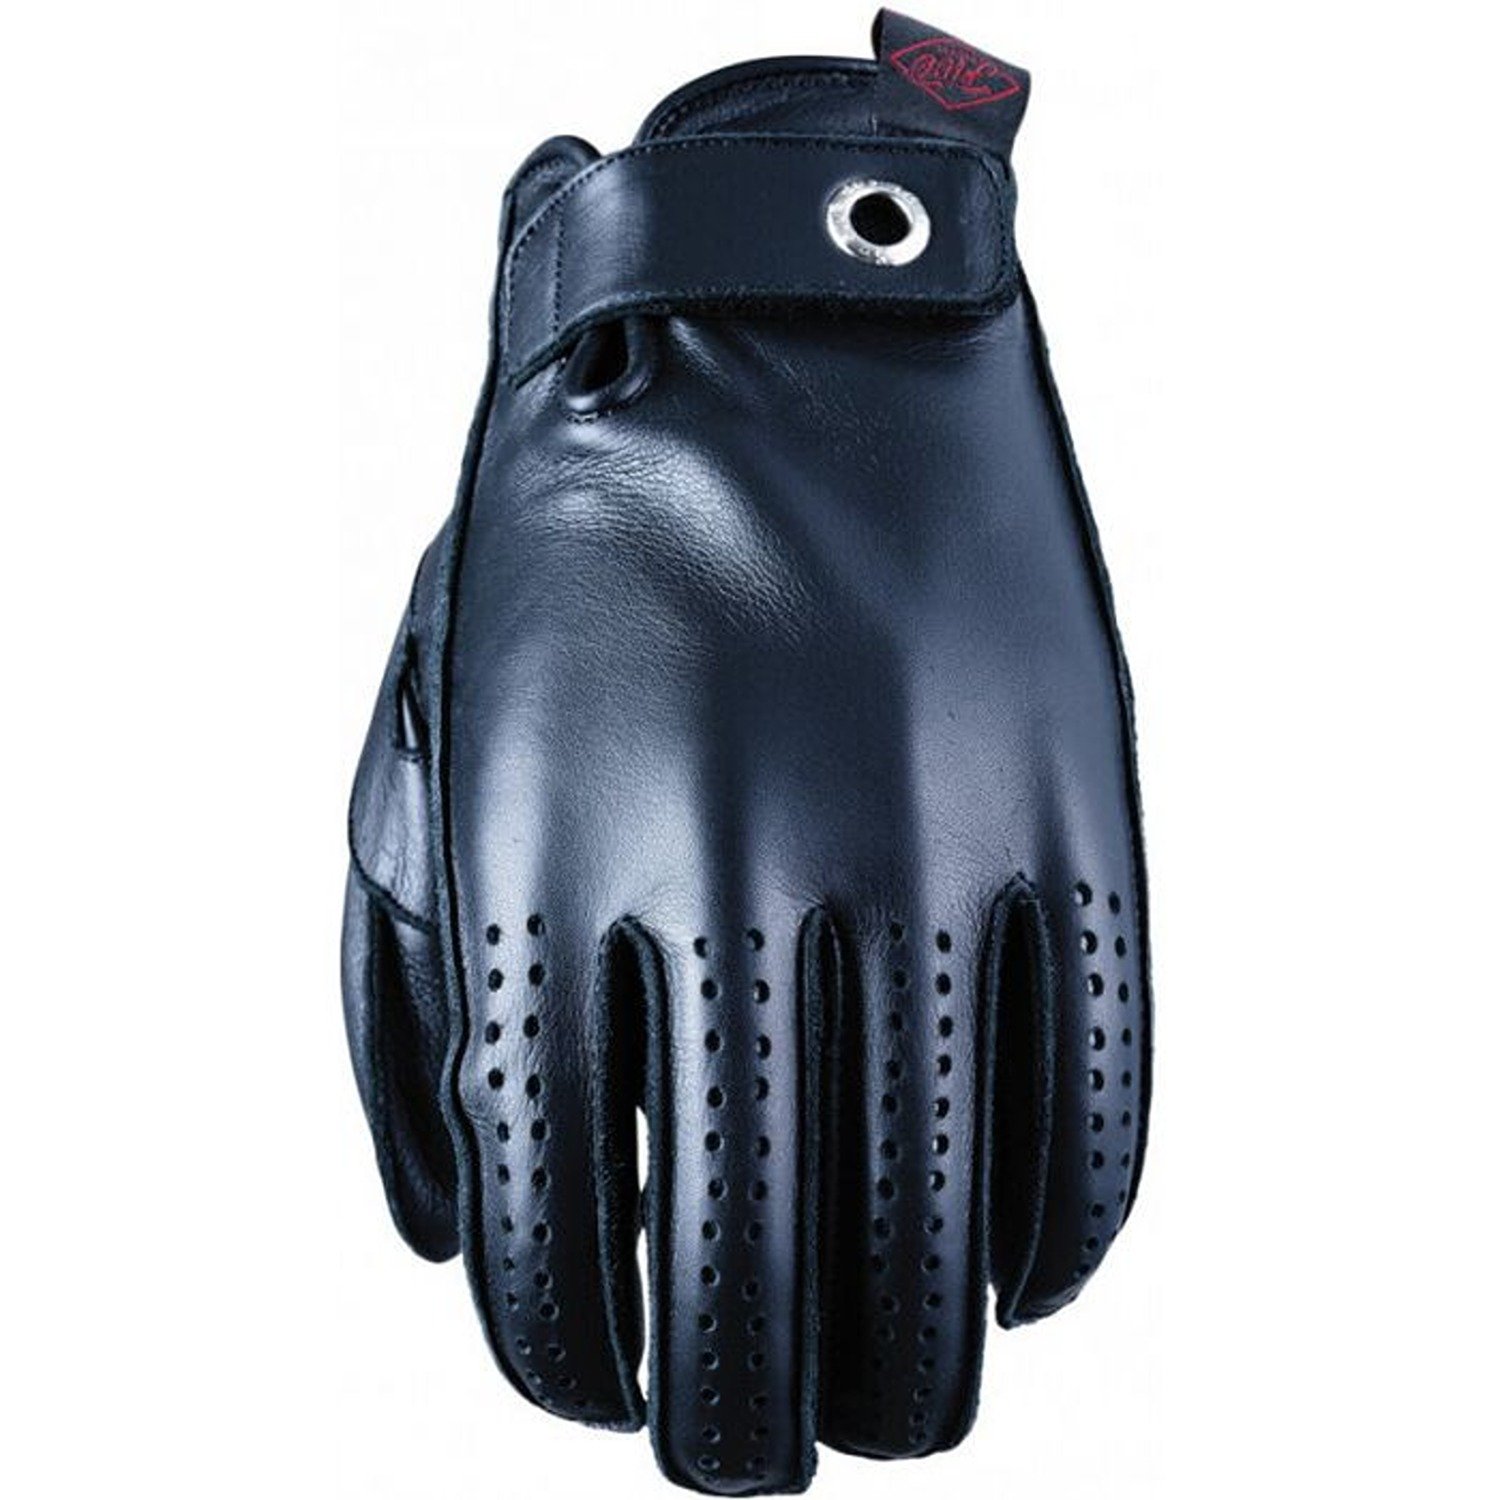 Image of Five Colorado Gloves Black Size M ID 4770916487283